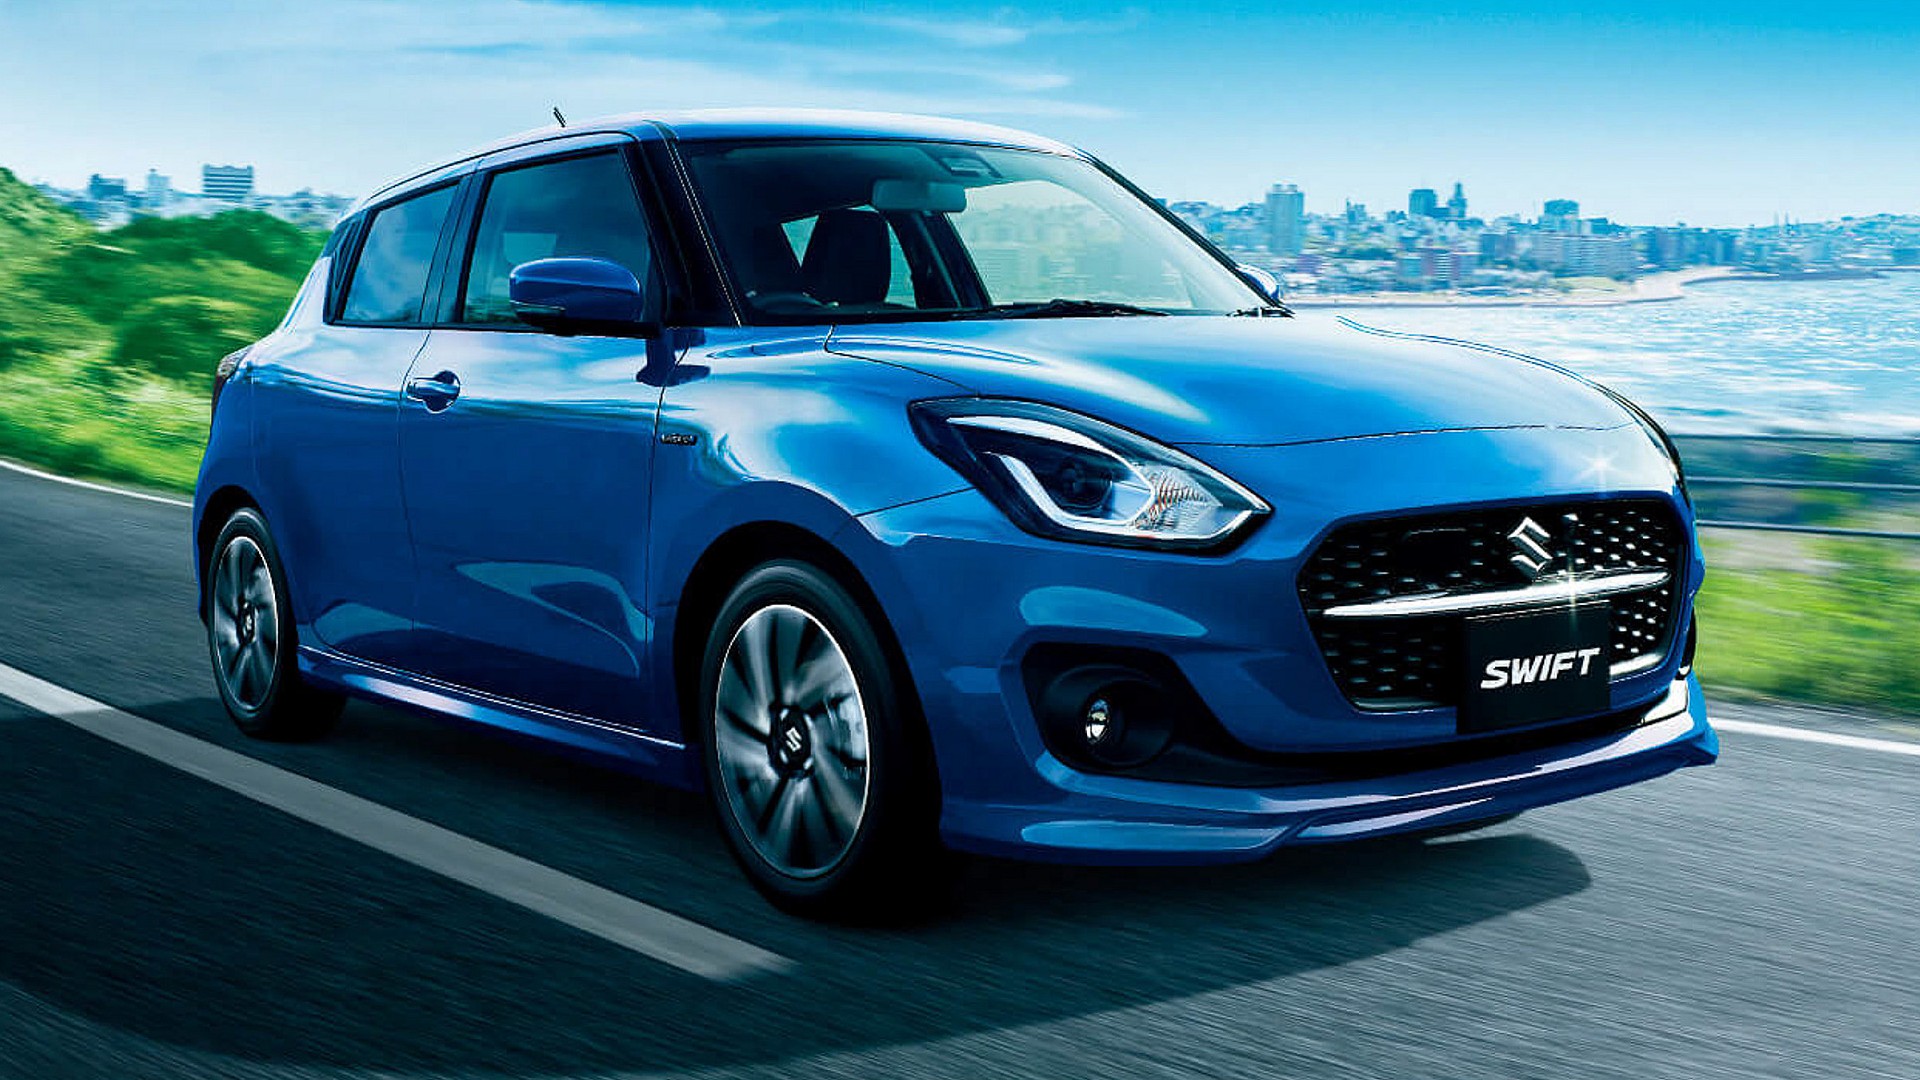 Maruti Swift, India’s #1 Car Will Be Relaunched With These New Features